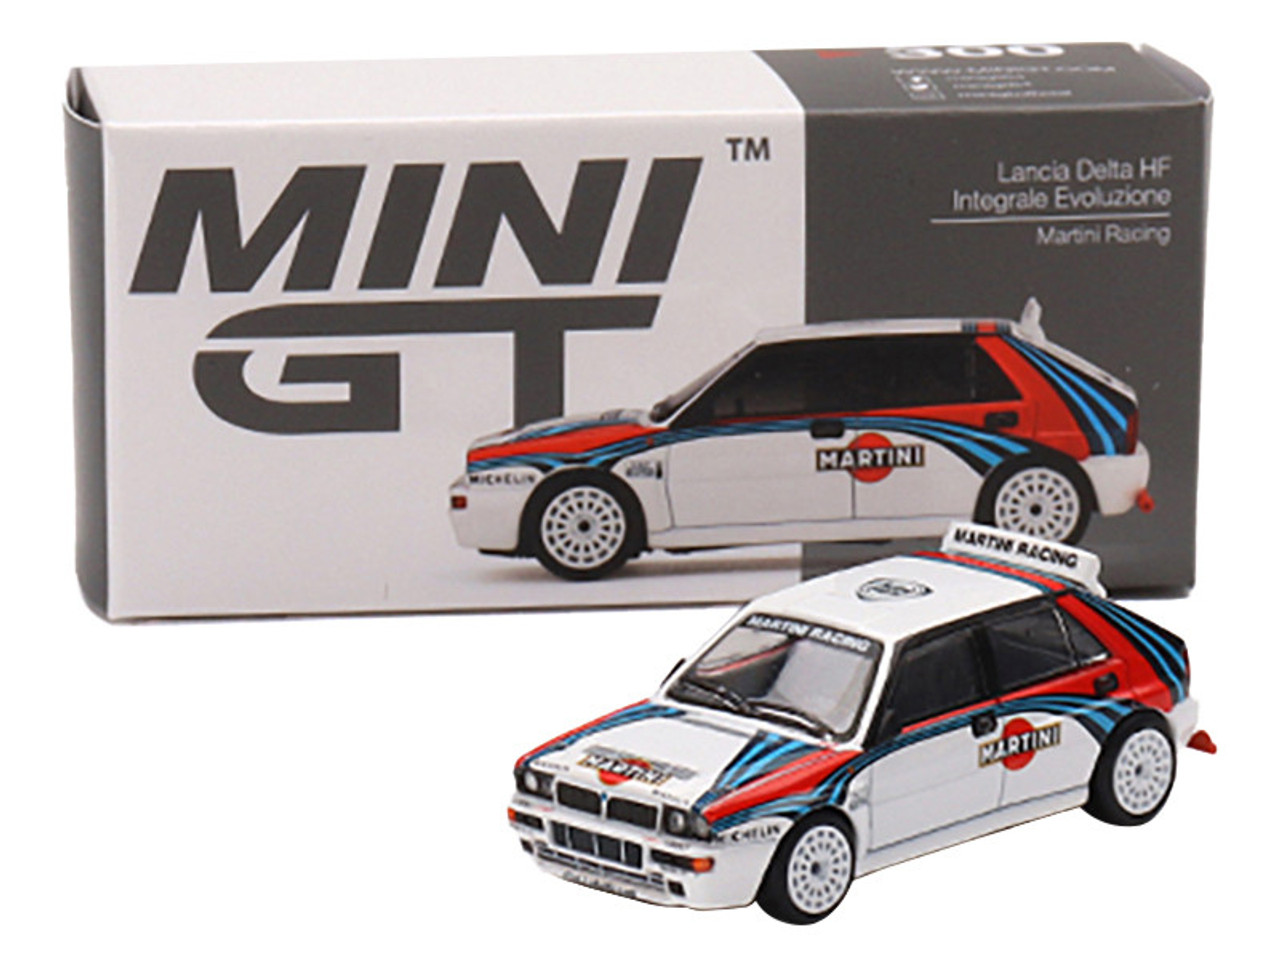 Lancia Delta HF Integrale Evoluzione White with Graphics "Martini Racing" Limited Edition to 3600 pieces Worldwide 1/64 Diecast Model Car by True Scale Miniatures